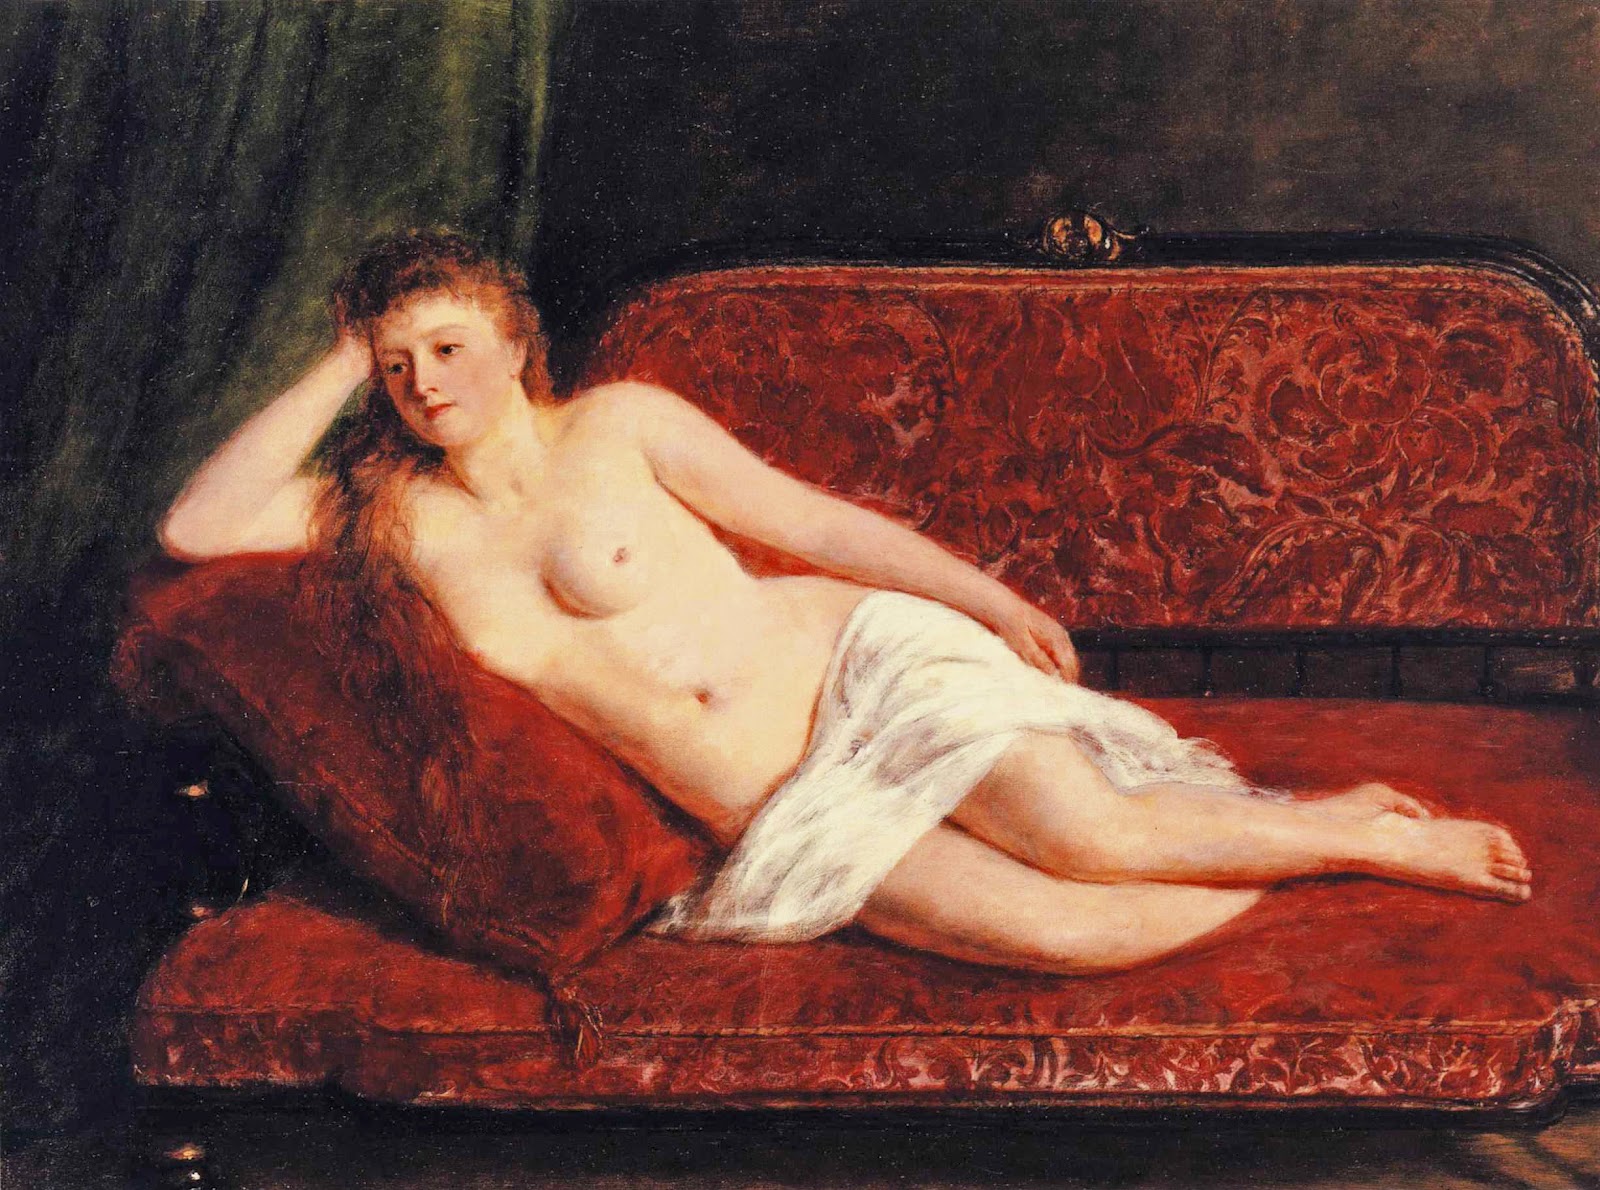 William Powell Frith_1897_After the Bath.jpg